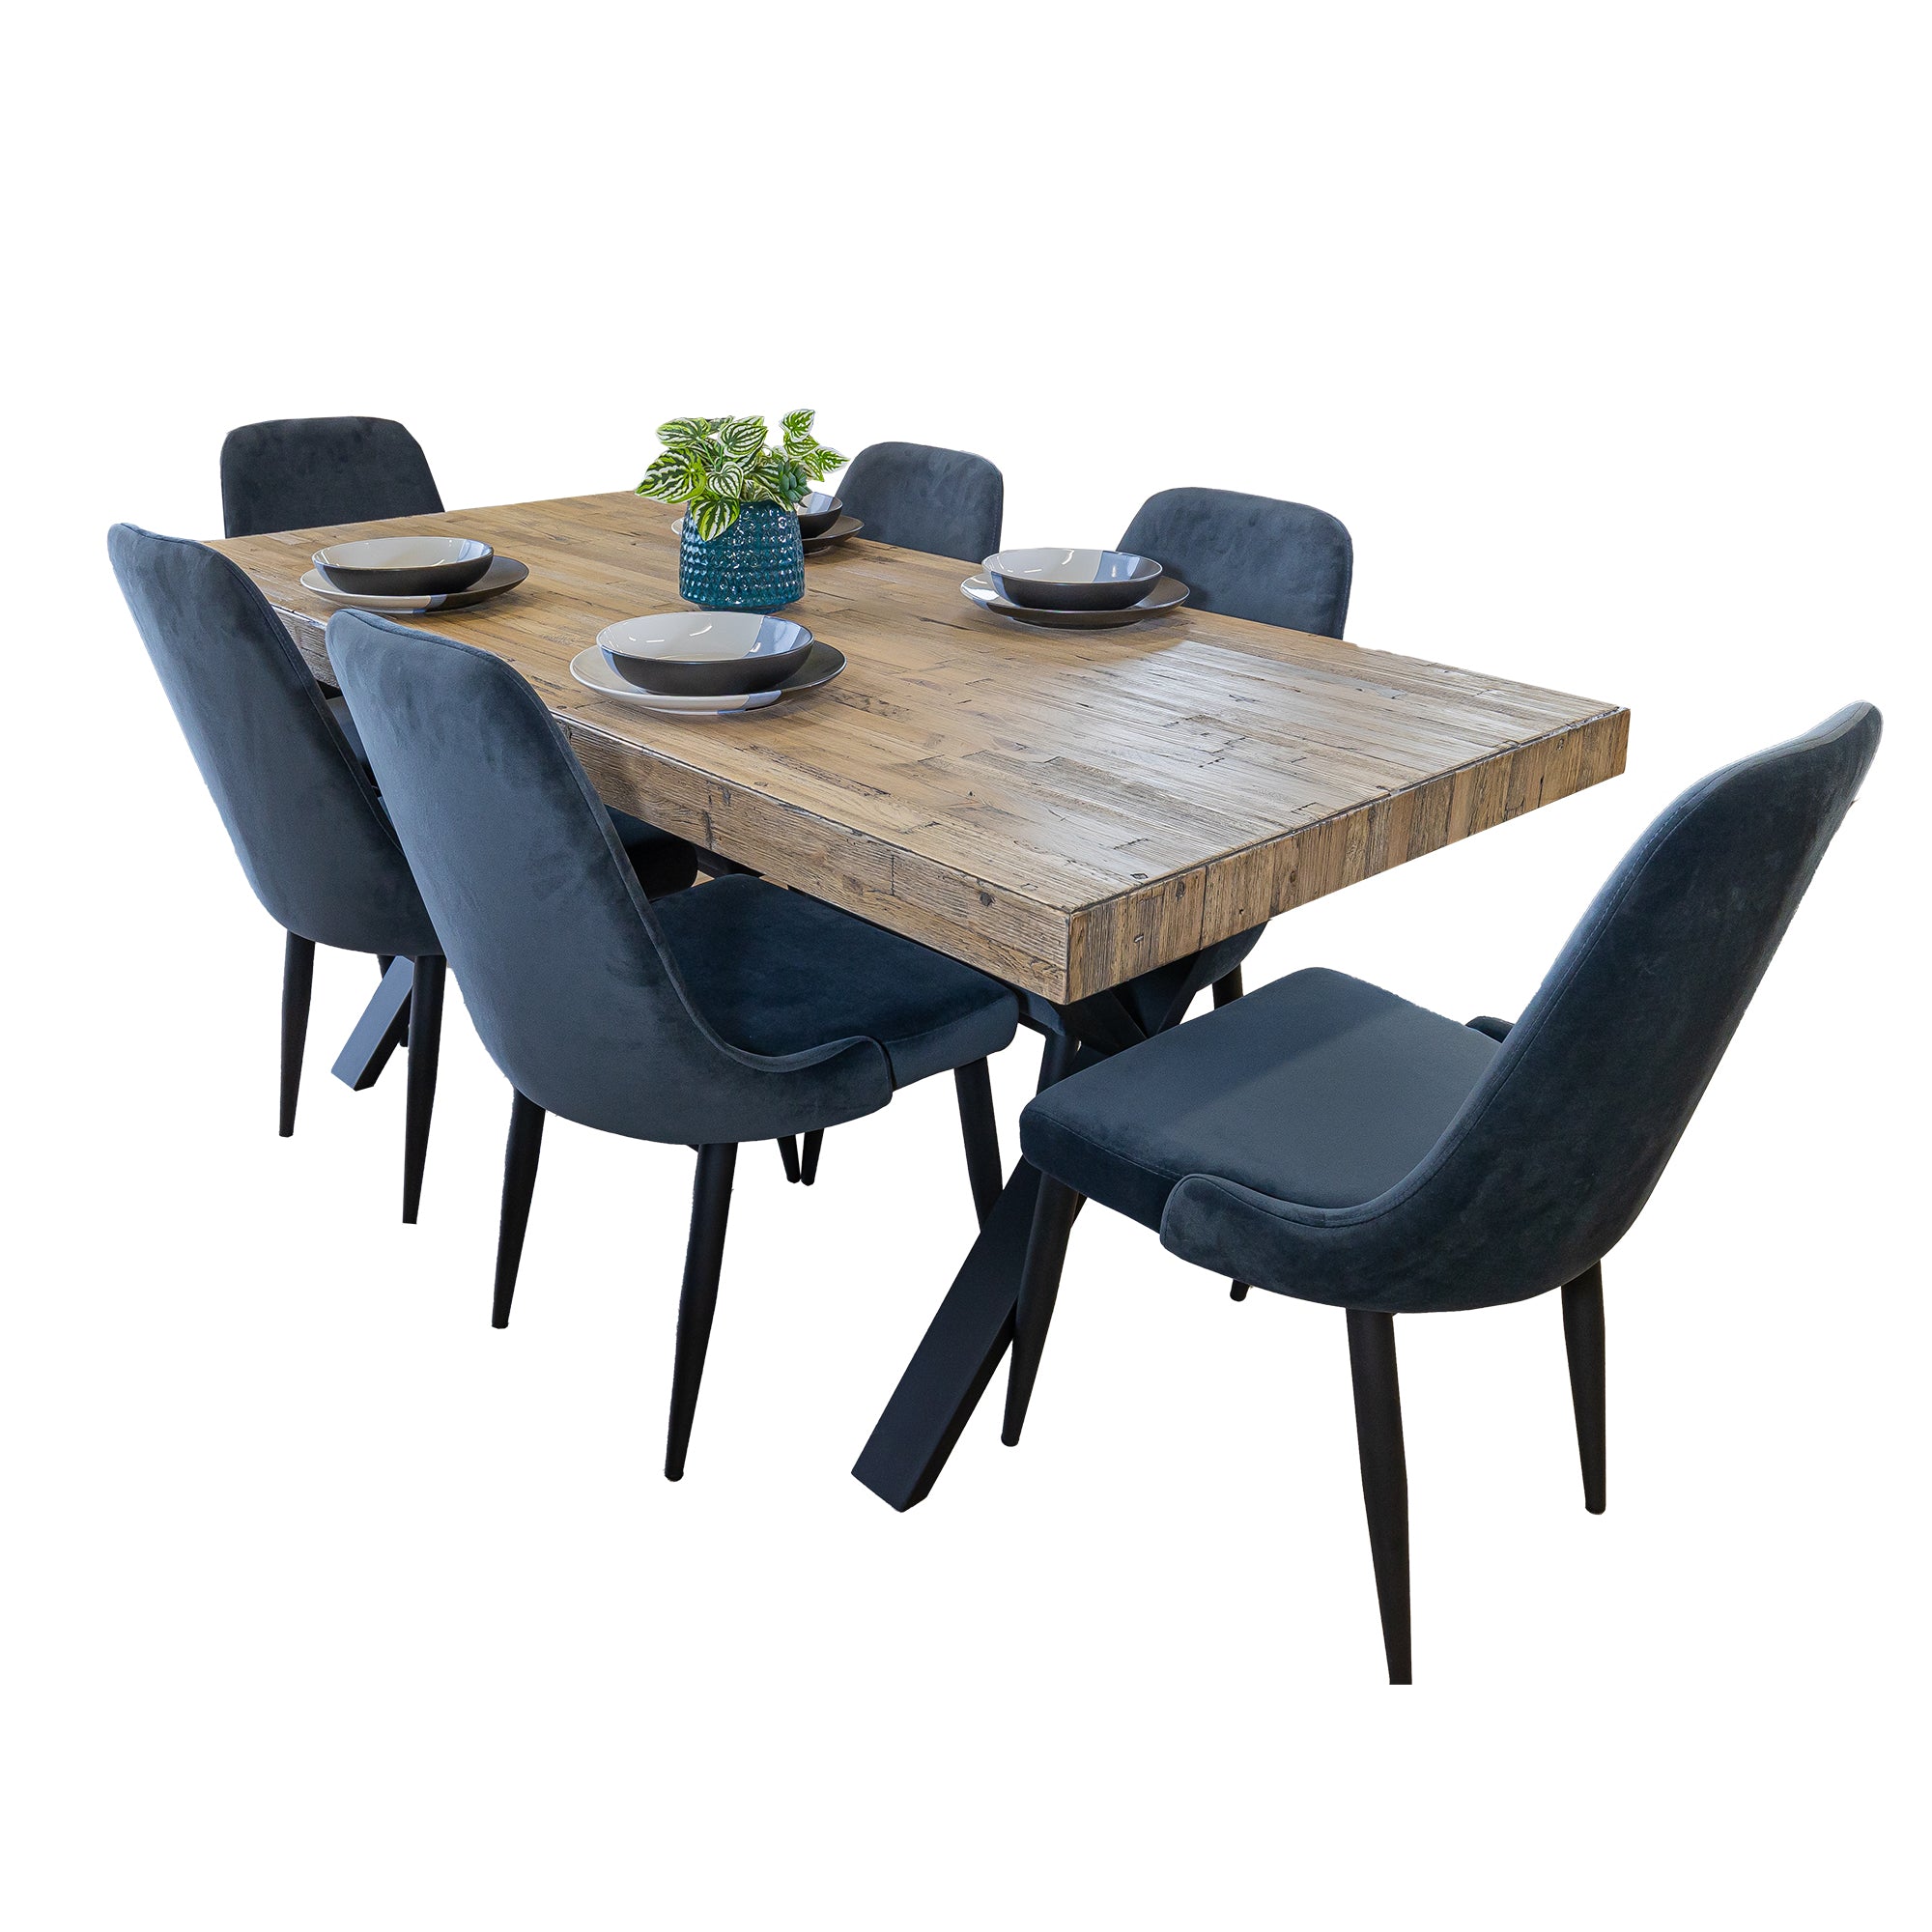 Charcoal Velvet Upholstered Dining Chair Set with Metal Frame - 4 pcs